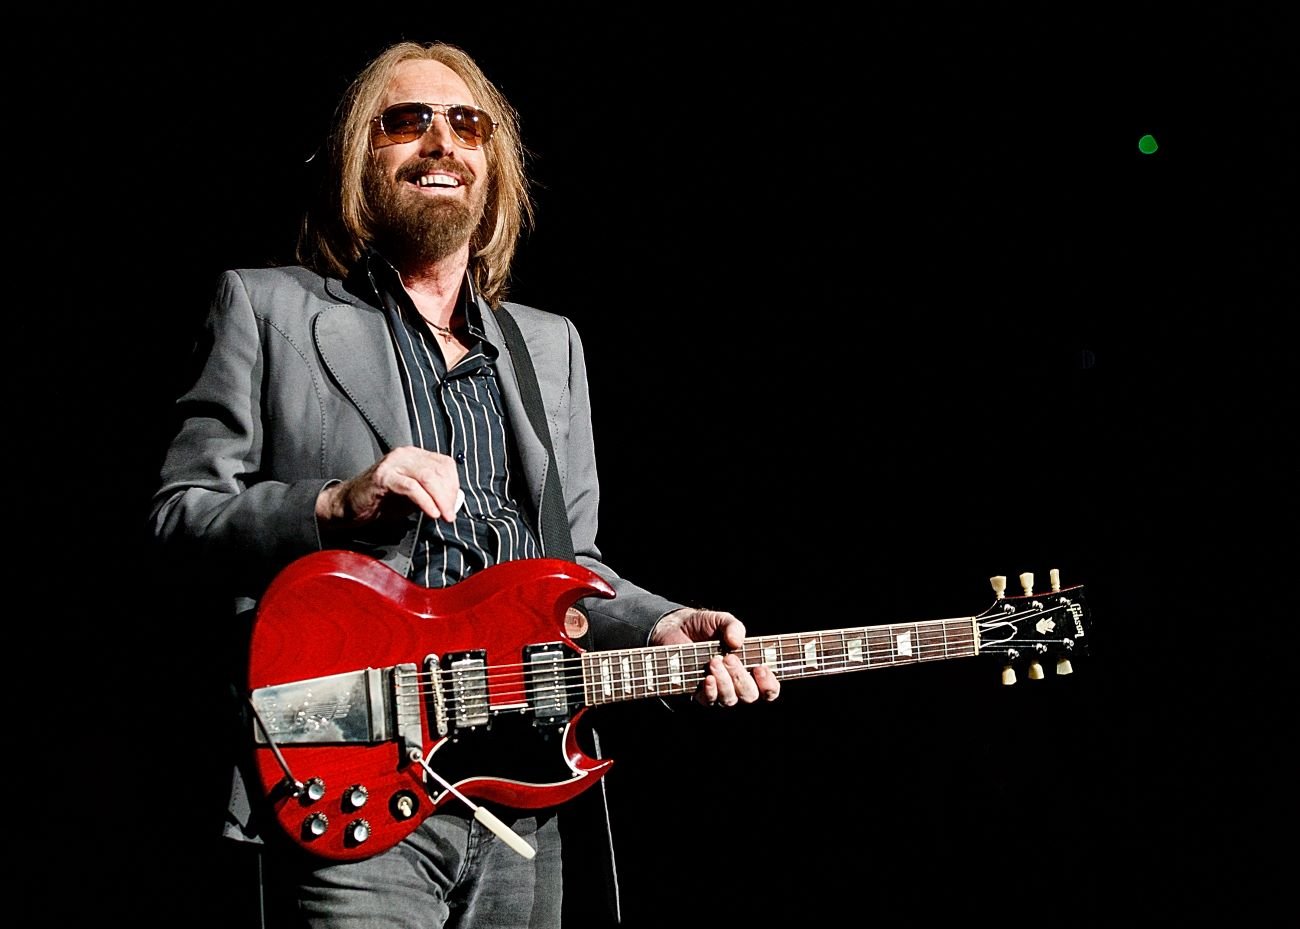 Tom Petty wears a gray suit and sunglasses and holds a guitar.